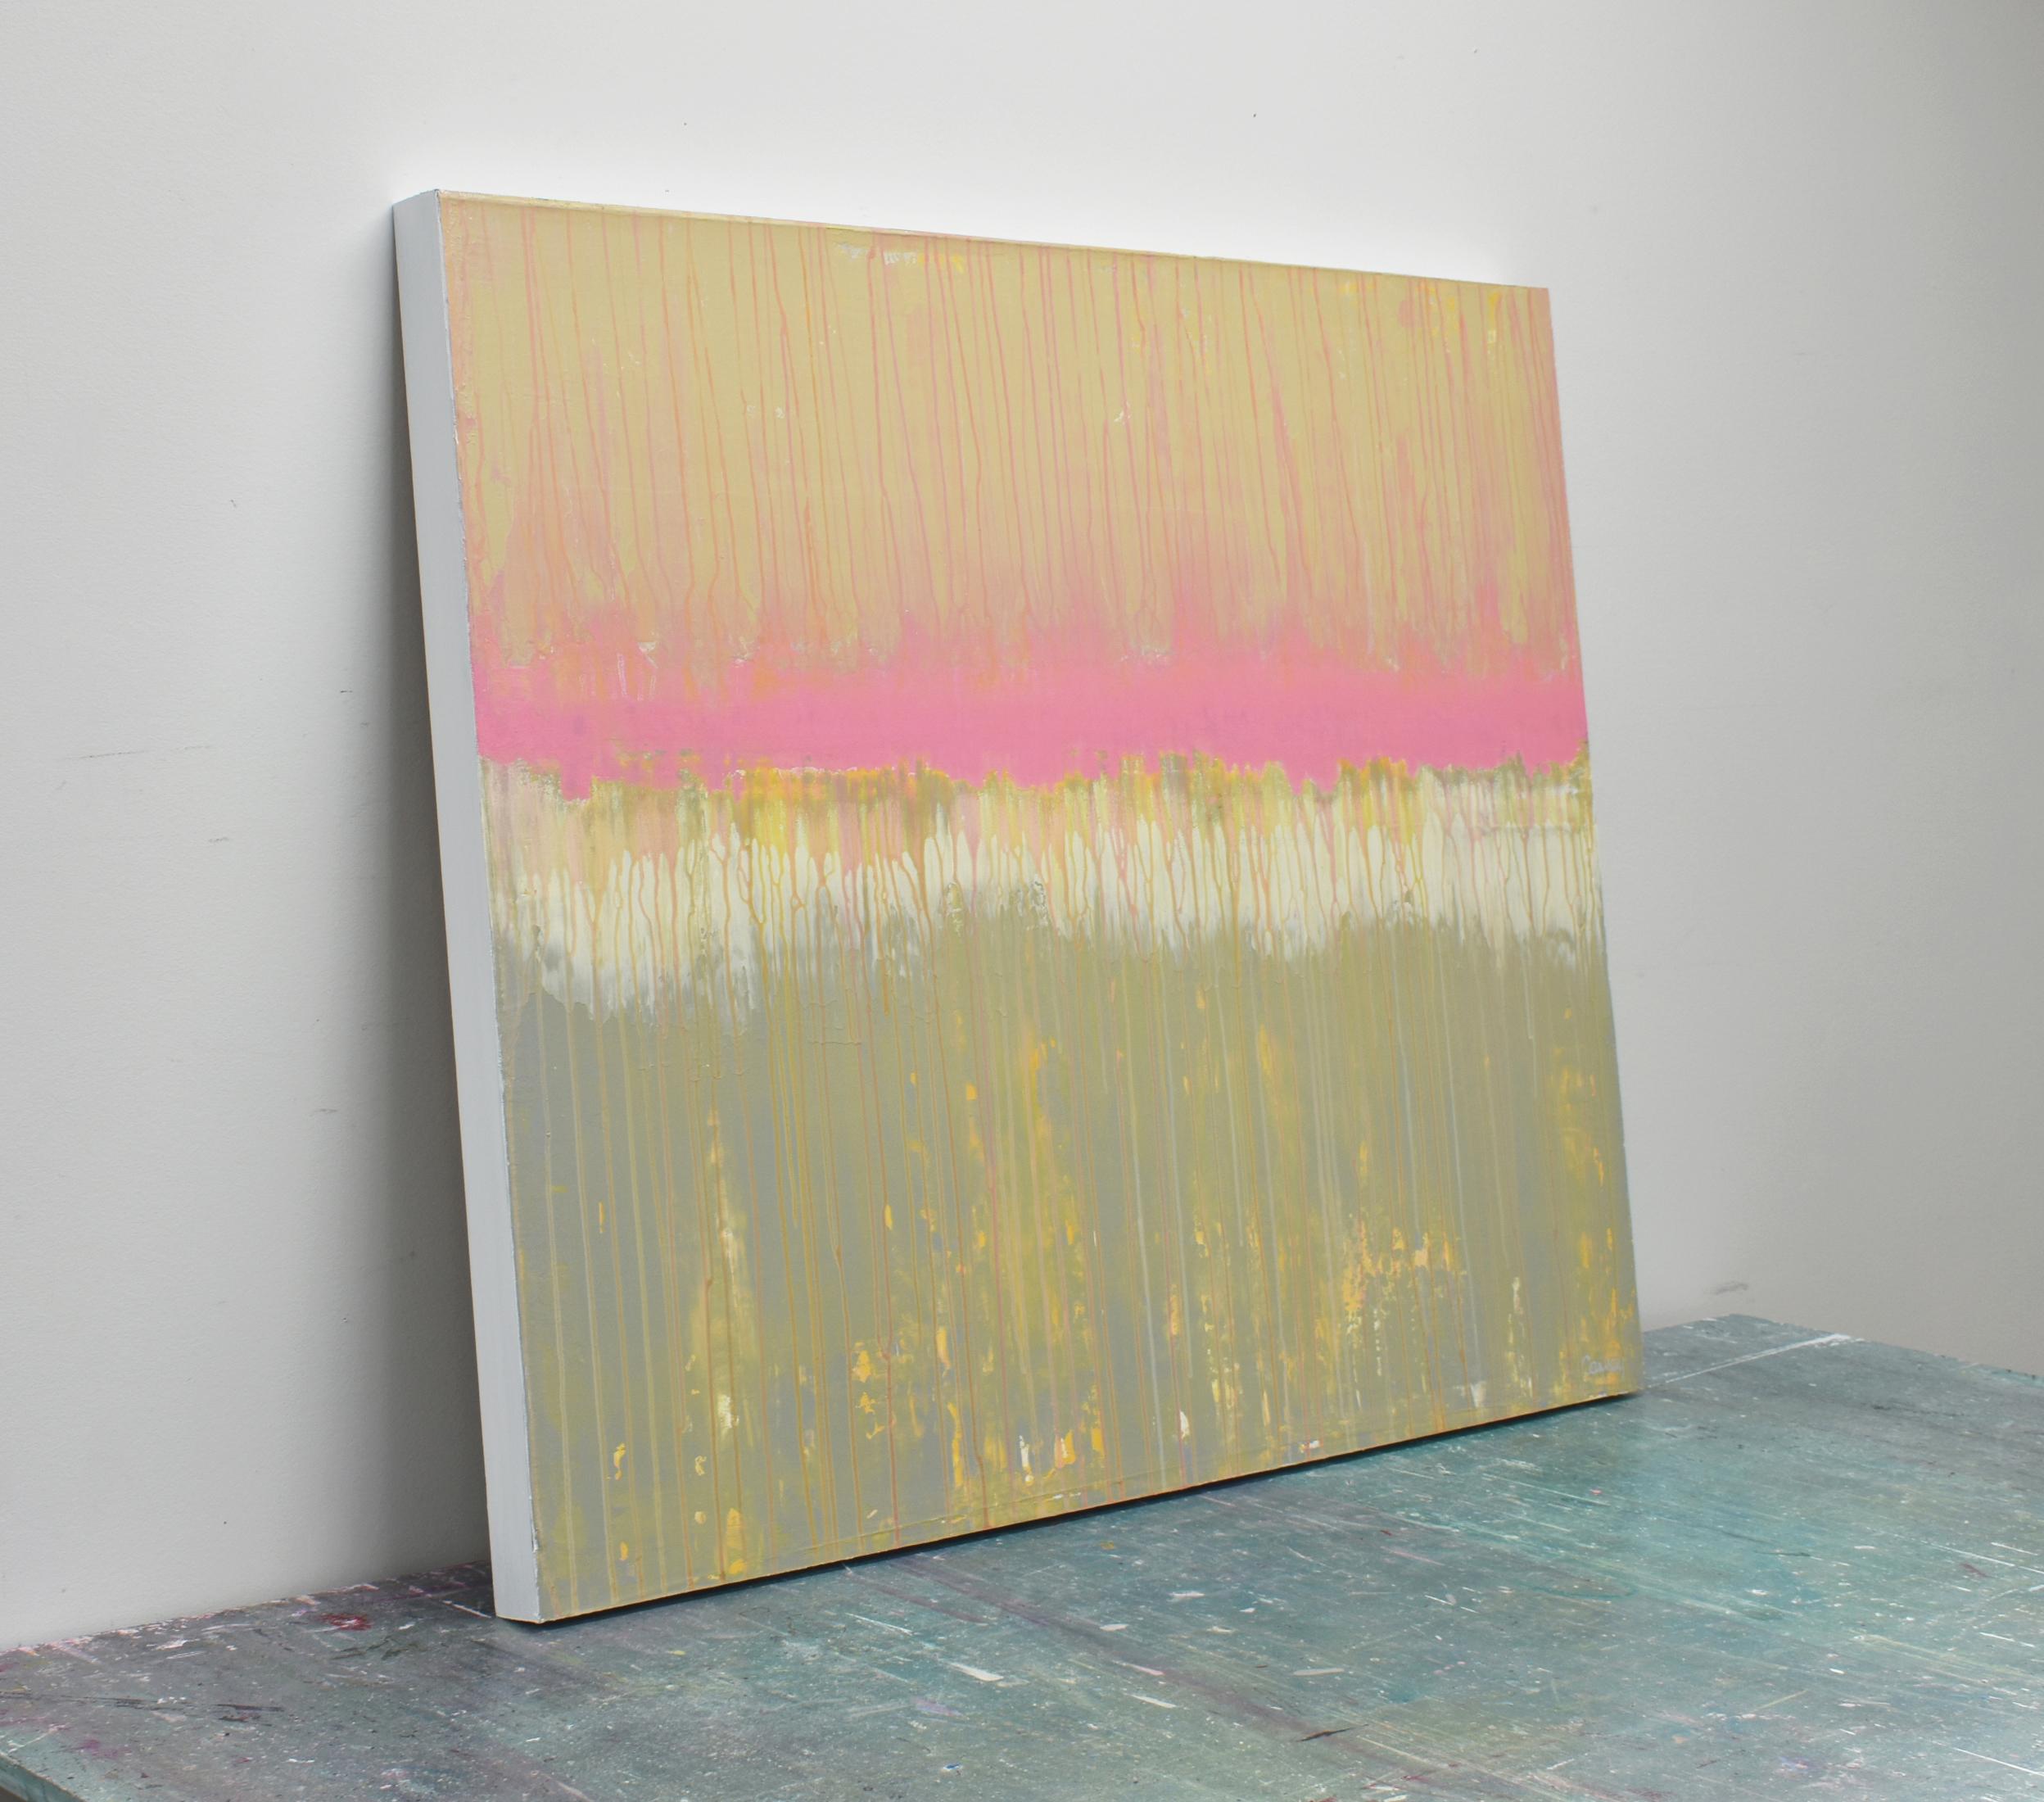 <p>Artist Comments<br>Soft pink and beige hues create a calming visual effect in this minimalist abstract painting. Executed using a dripping technique, the composition exudes spontaneity and fluidity. As part of artist Lisa Carney's GeoHorizon